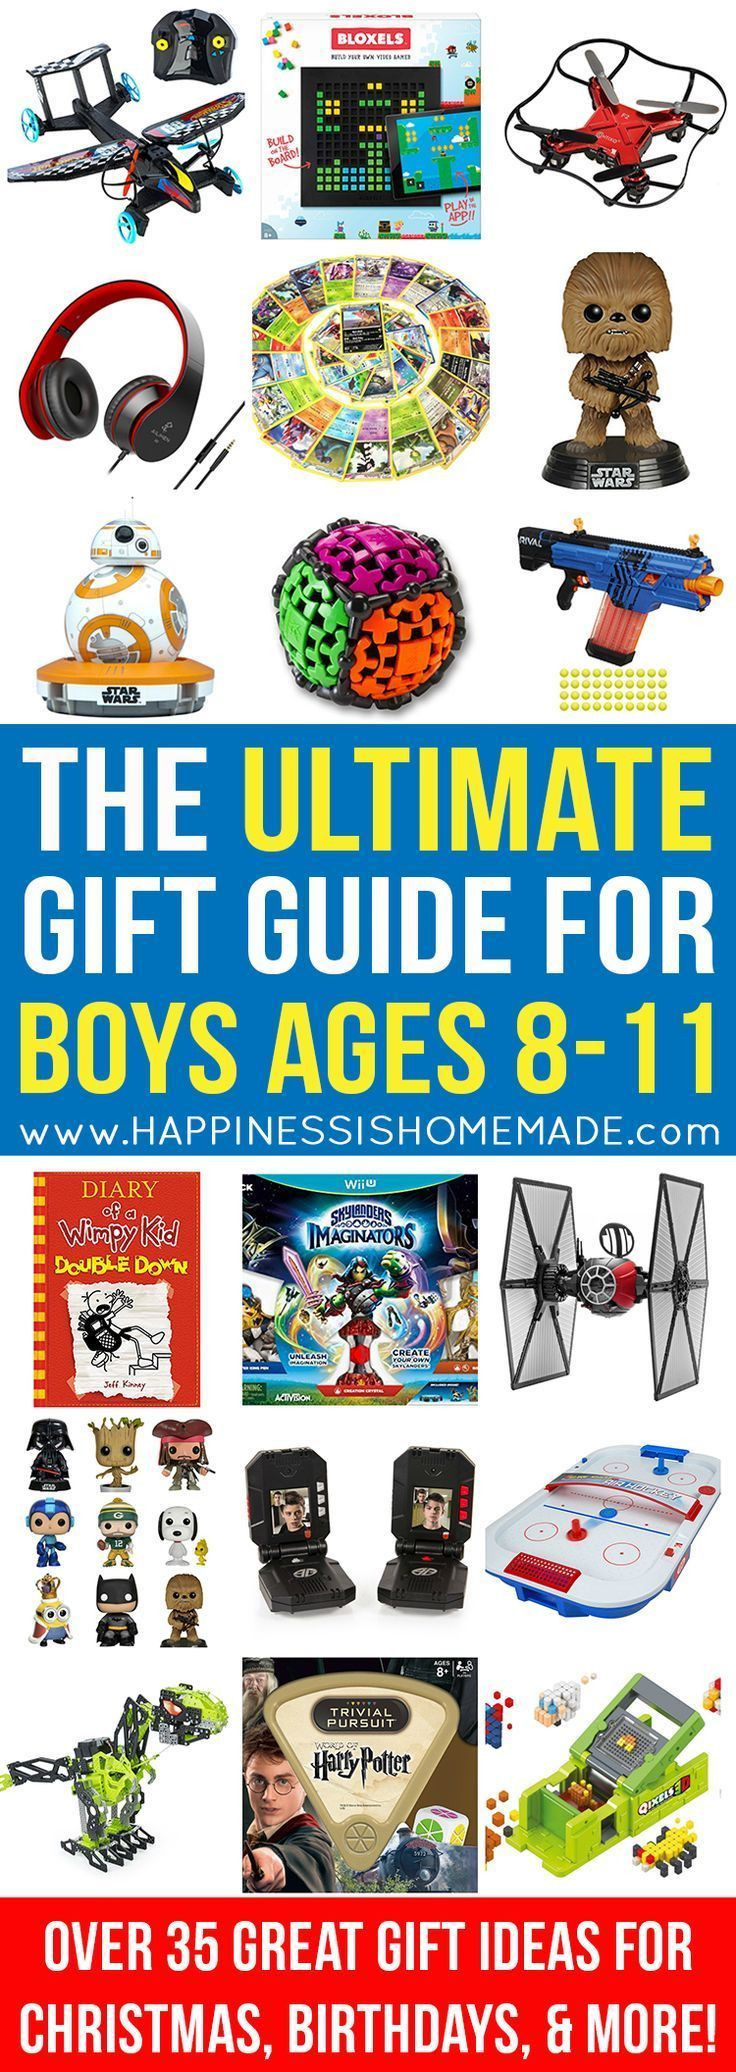 Christmas Gift Ideas For 3 Year Old Boy
 10 images about Best Toys for 9 Year Old Boys on